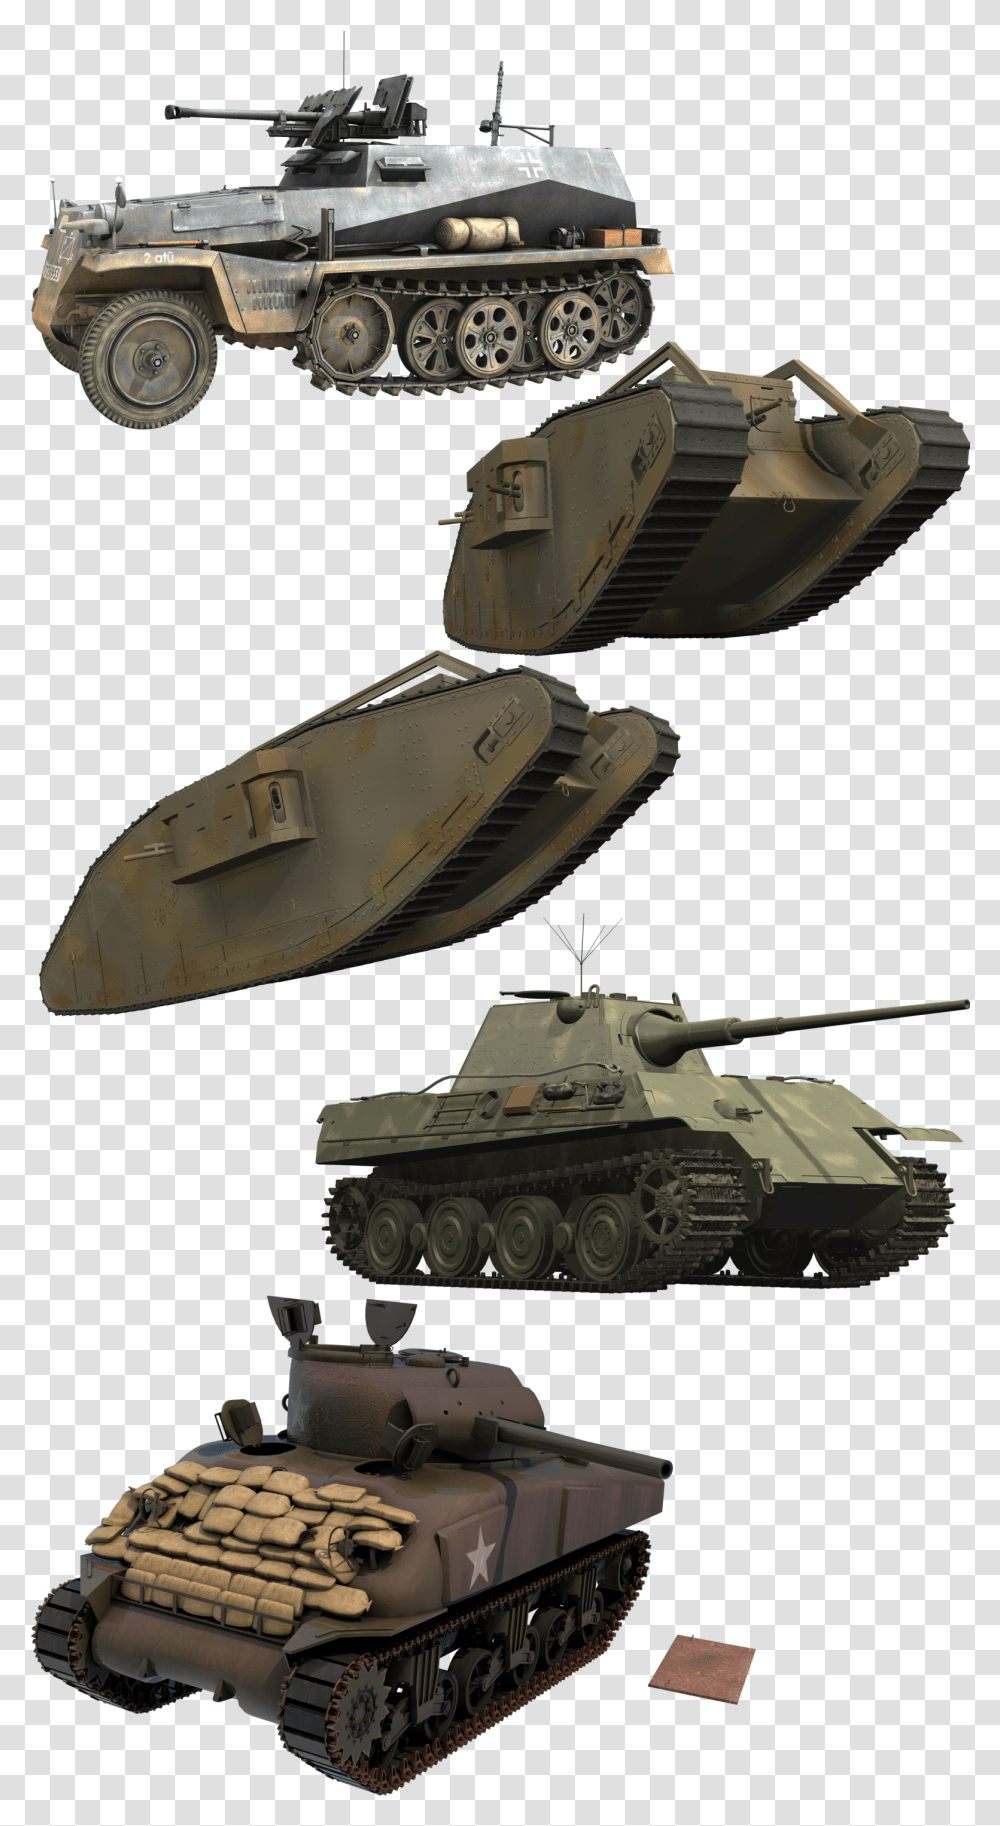 Download Hd Tanks Tank, Army, Vehicle, Armored, Military Uniform Transparent Png